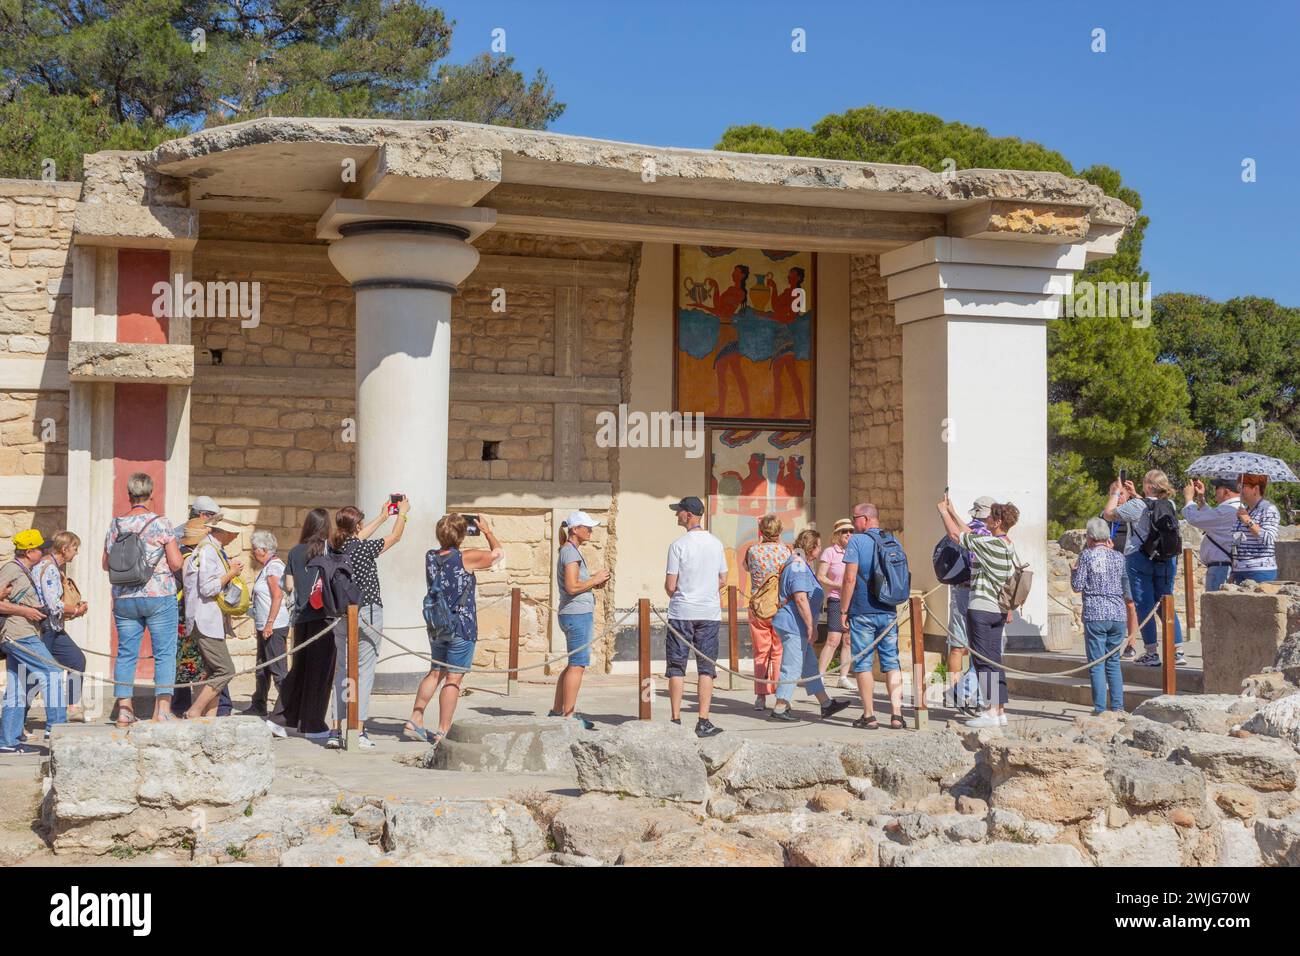 Palace of Minos, Knossos, Crete, Greece.  A group of tourists admiring the 'Procession' fresco in the South Propylaeum. Stock Photo